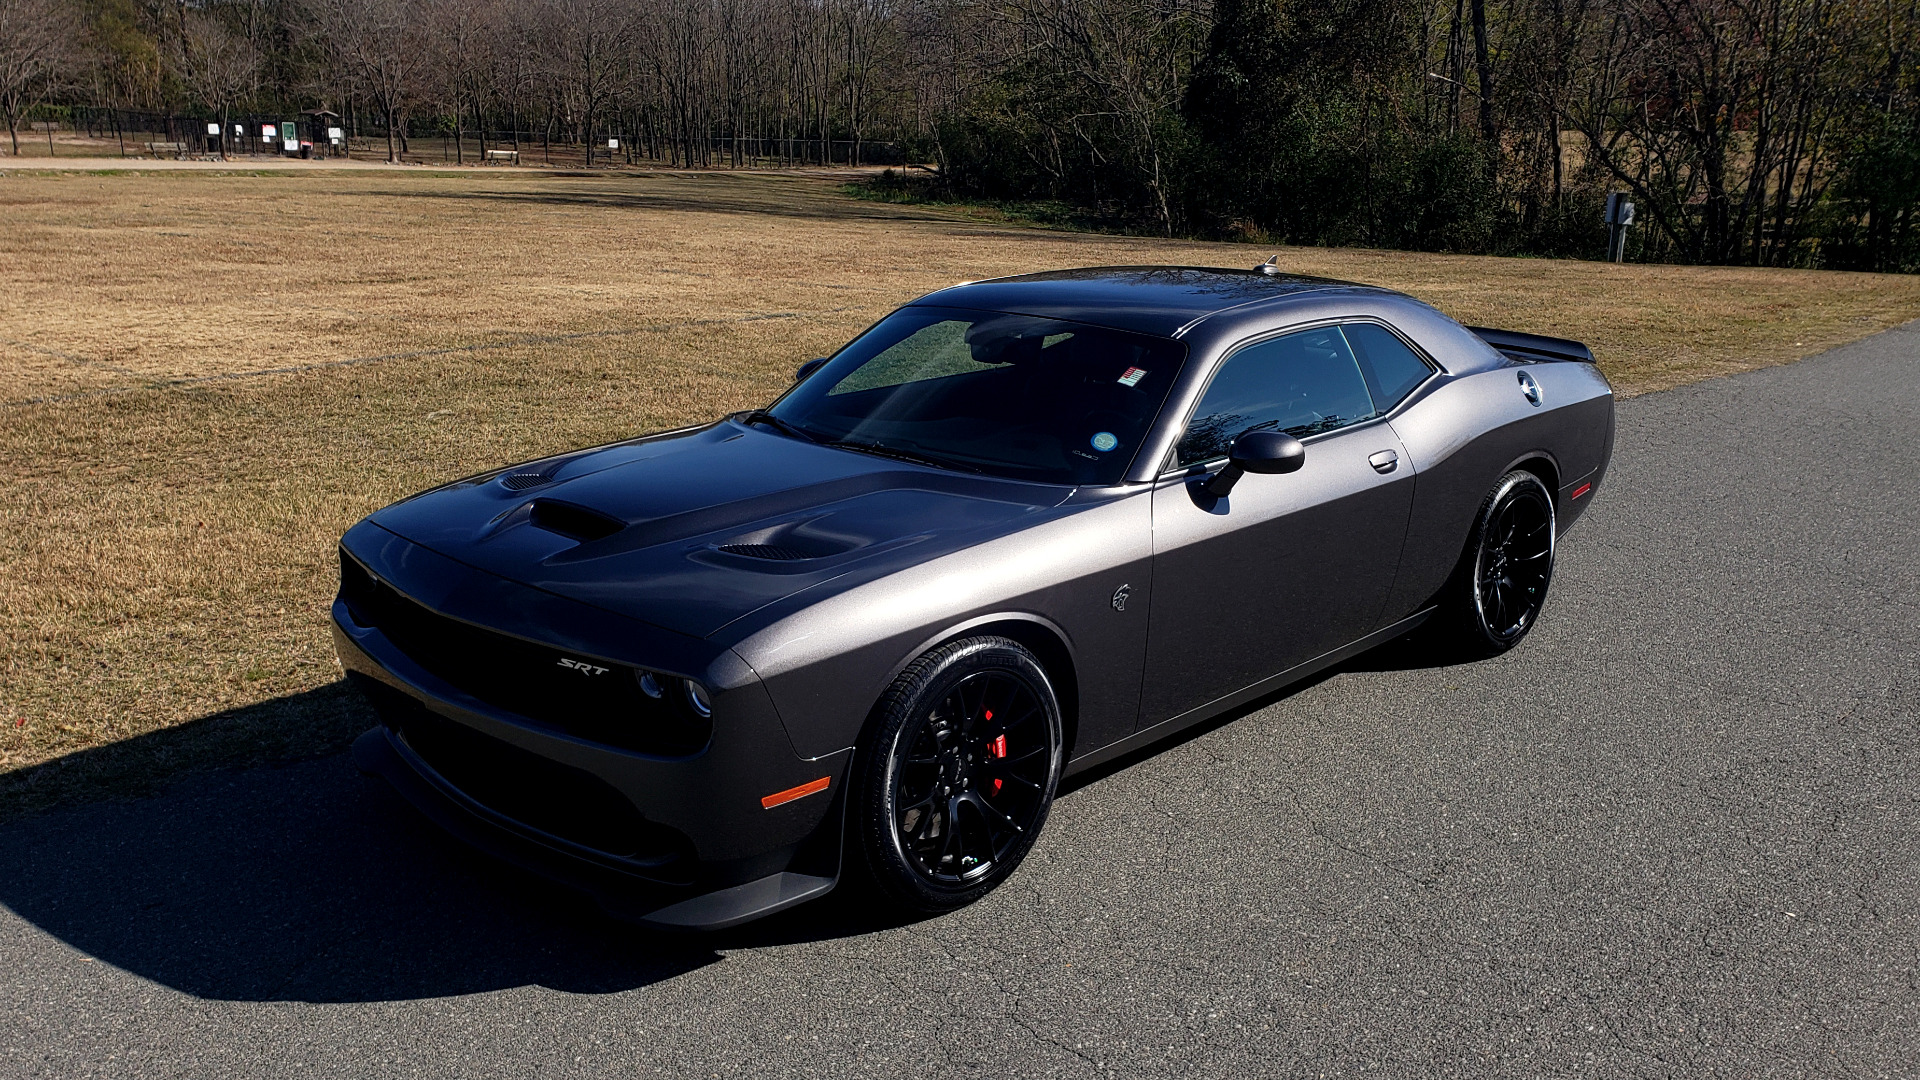 Used 2016 Dodge CHALLENGER SRT HELLCAT COUPE / 6-SPD MAN / NAV / SRT APPS / REARVIEW for sale Sold at Formula Imports in Charlotte NC 28227 1